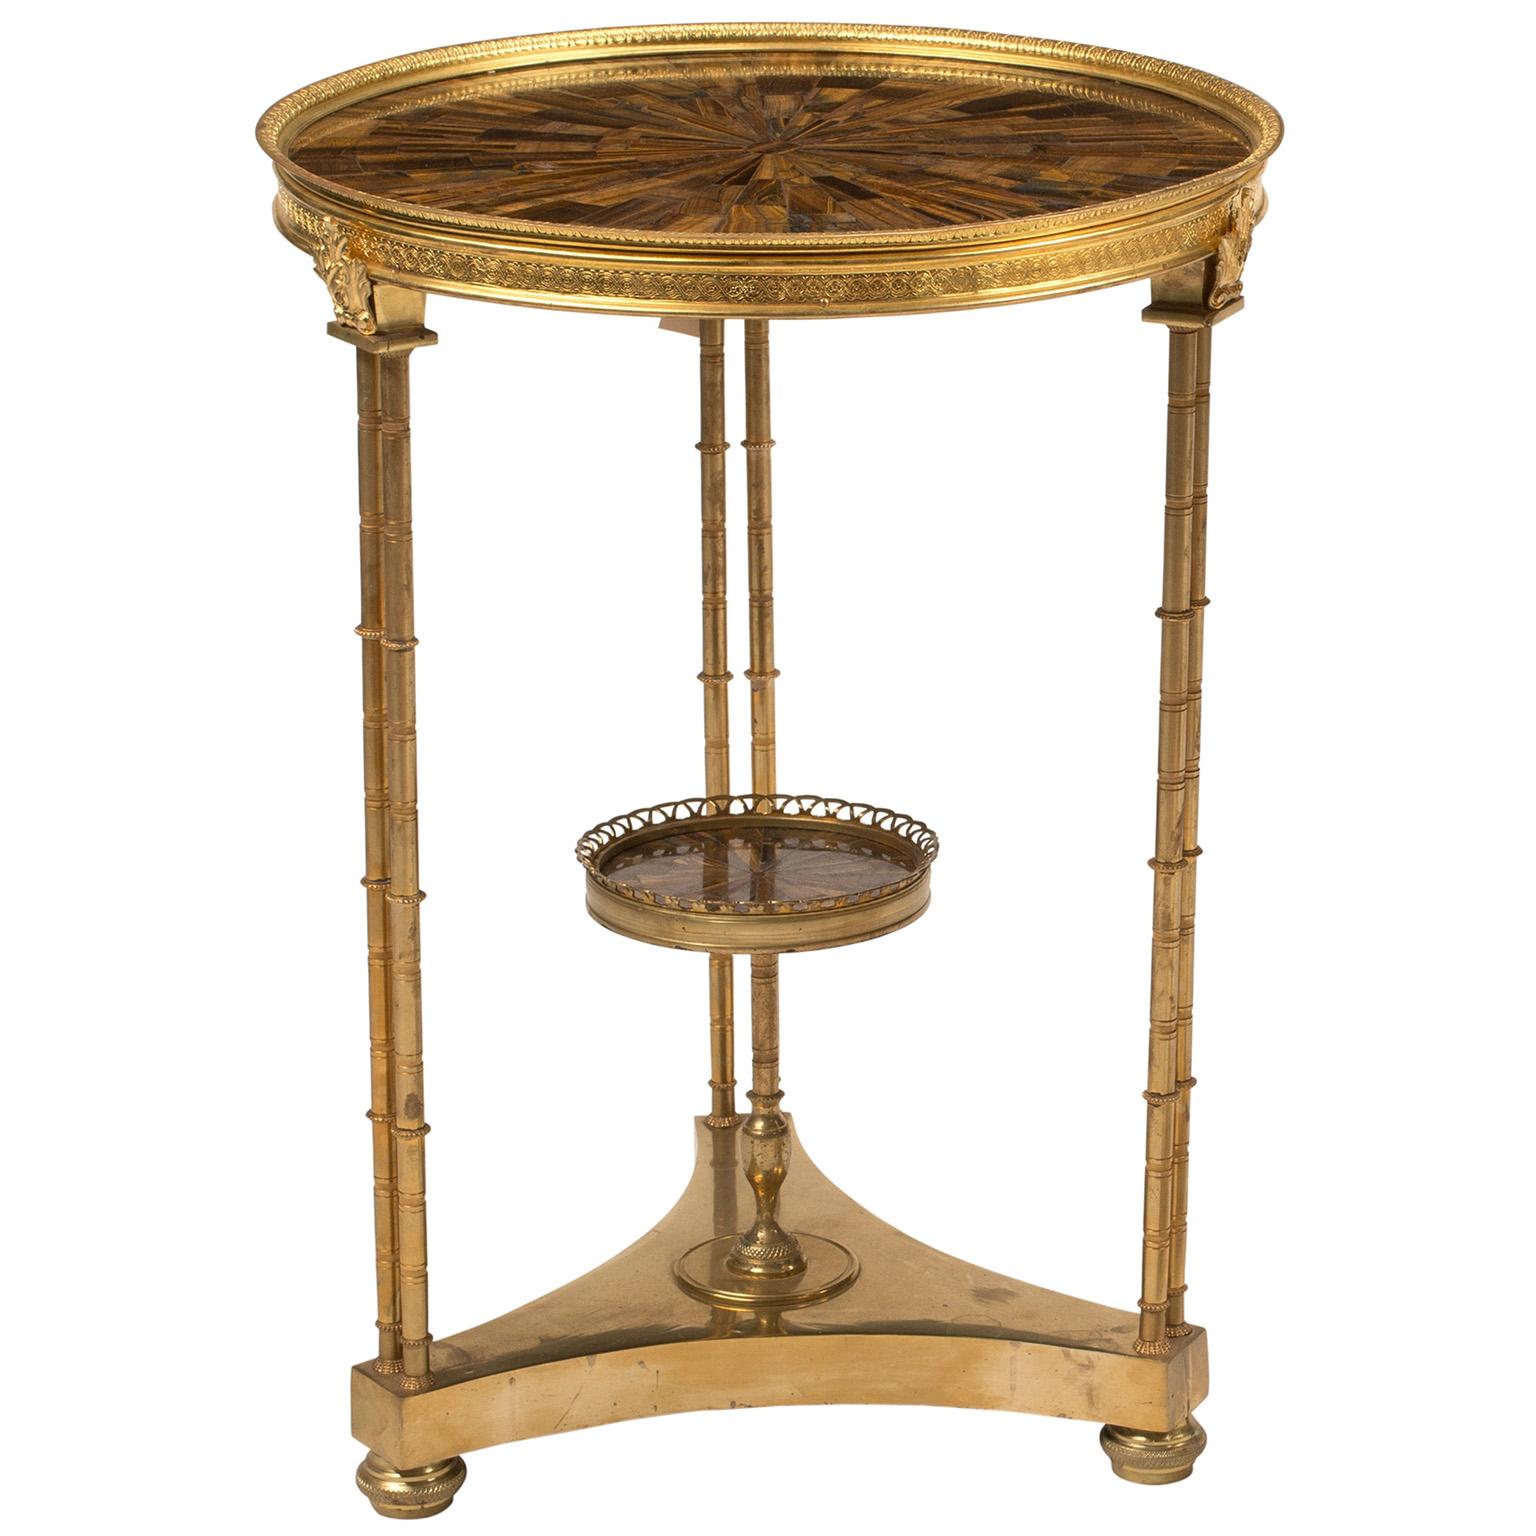 Neoclassical Revival Pair of Neoclassical-Style Gilt Bronze Round Side Tables with Tiger-Eye Tops